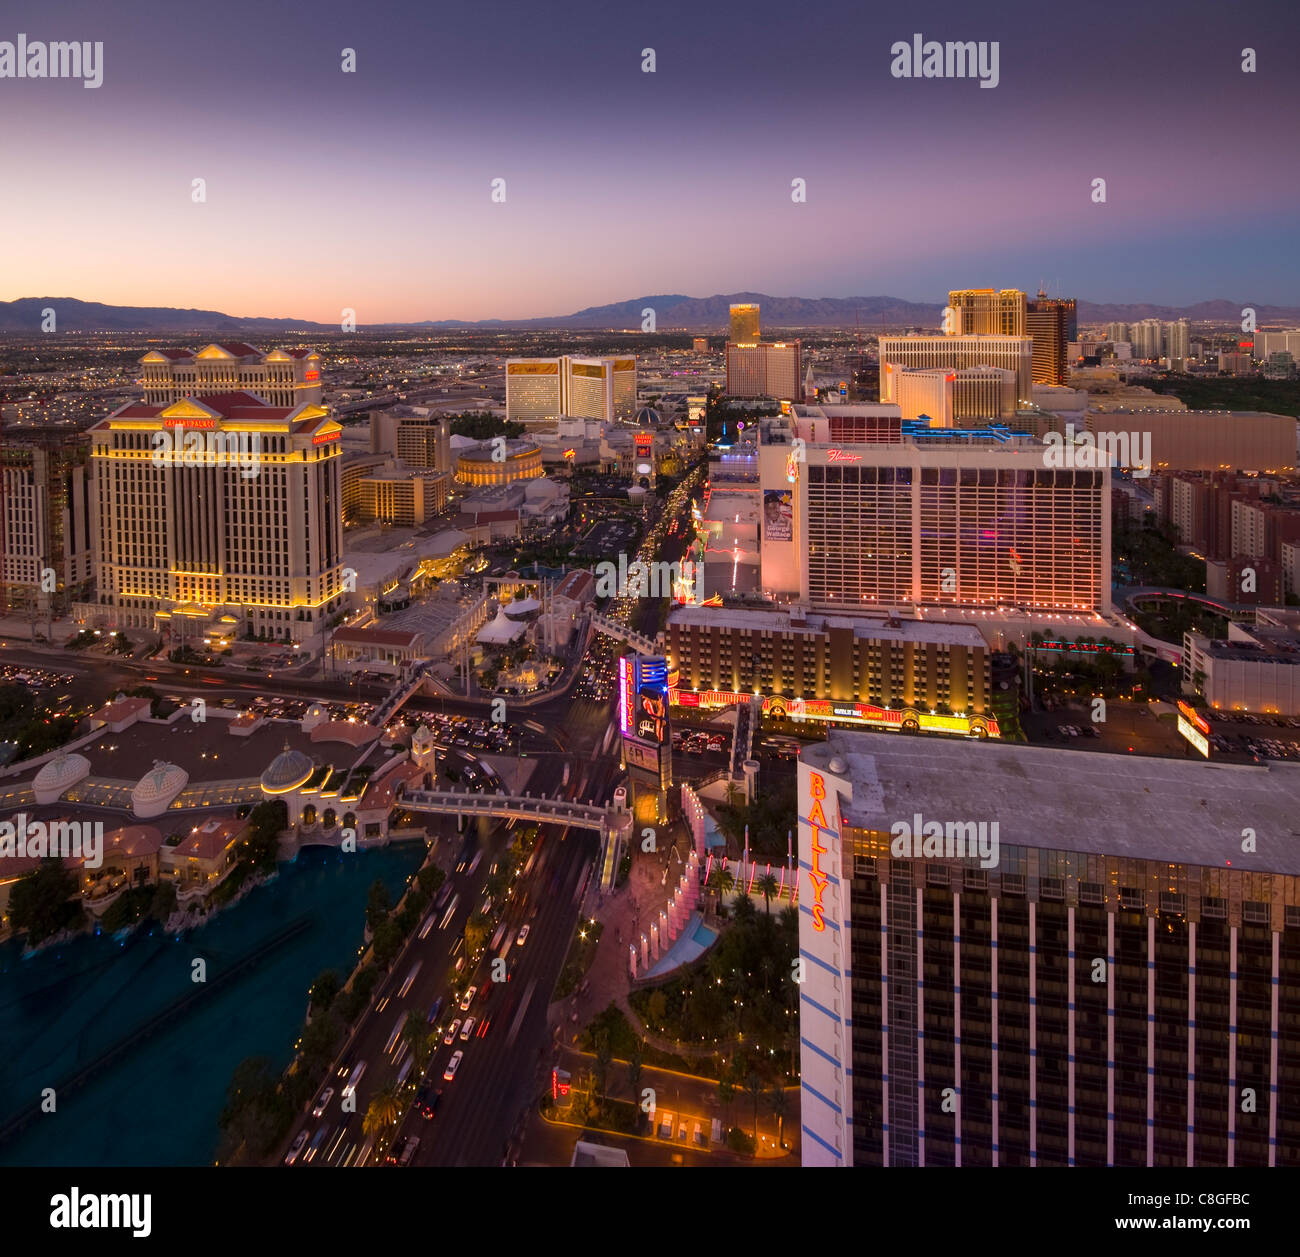 Le Strip, Las Vegas, Nevada, United States of America Banque D'Images